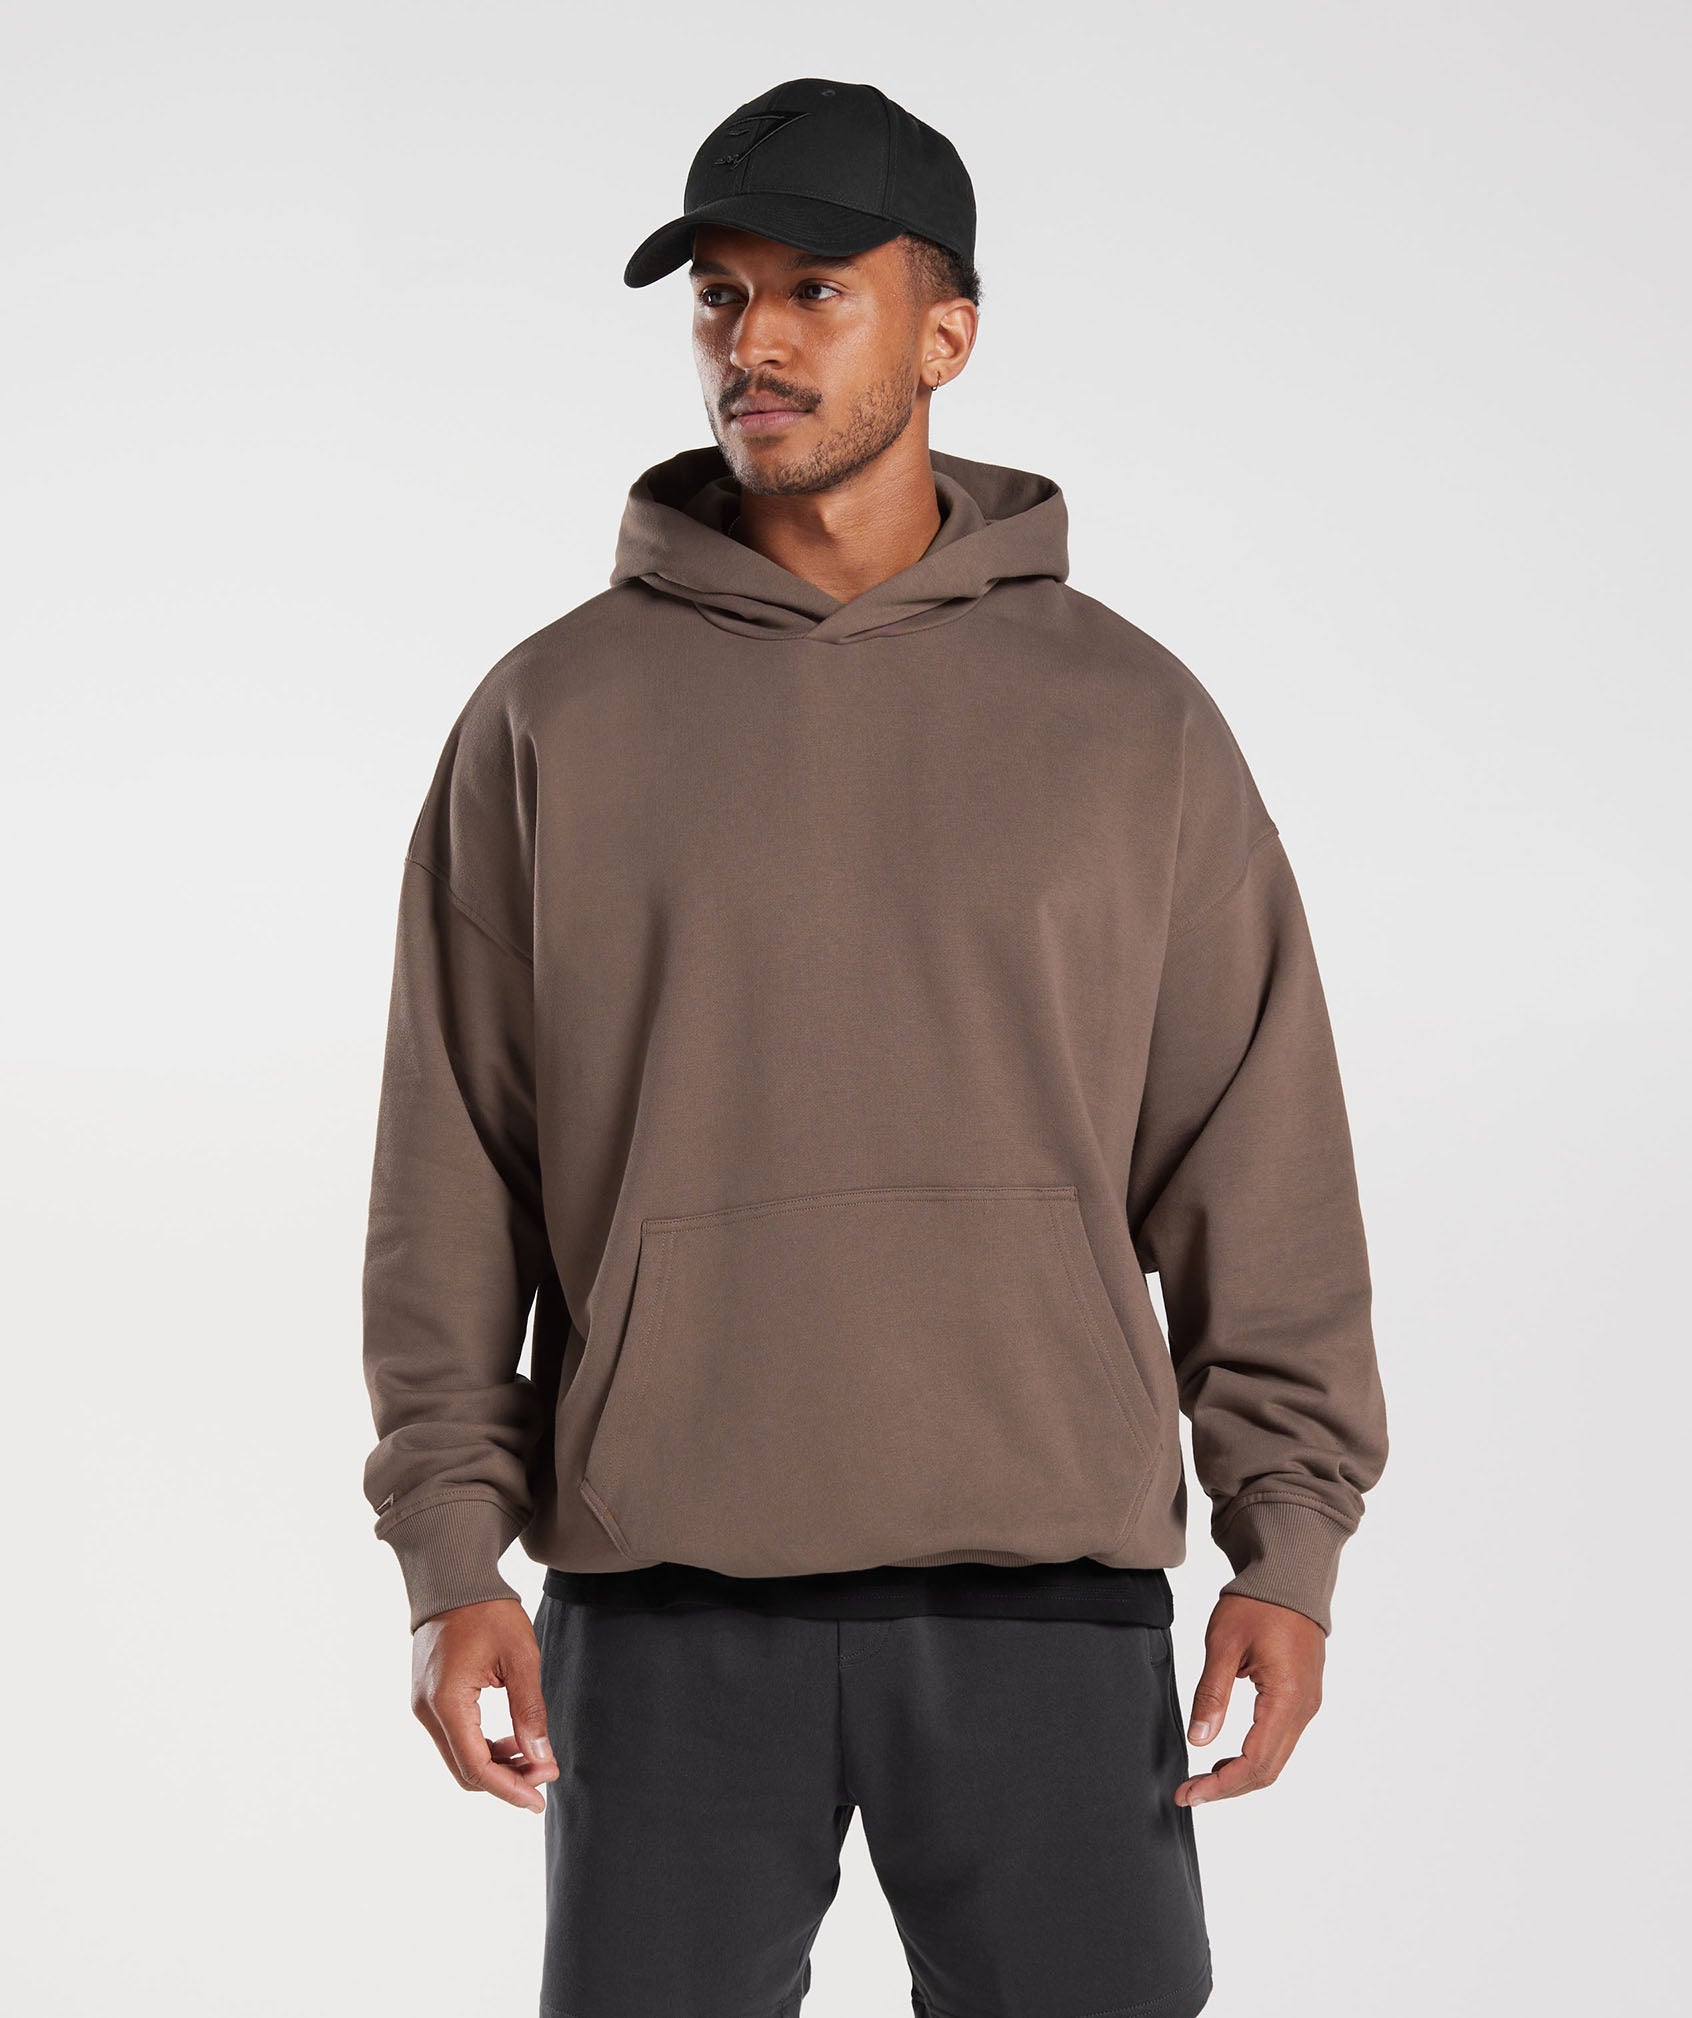 Rest Day Essentials Hoodie in Truffle Brown - view 1